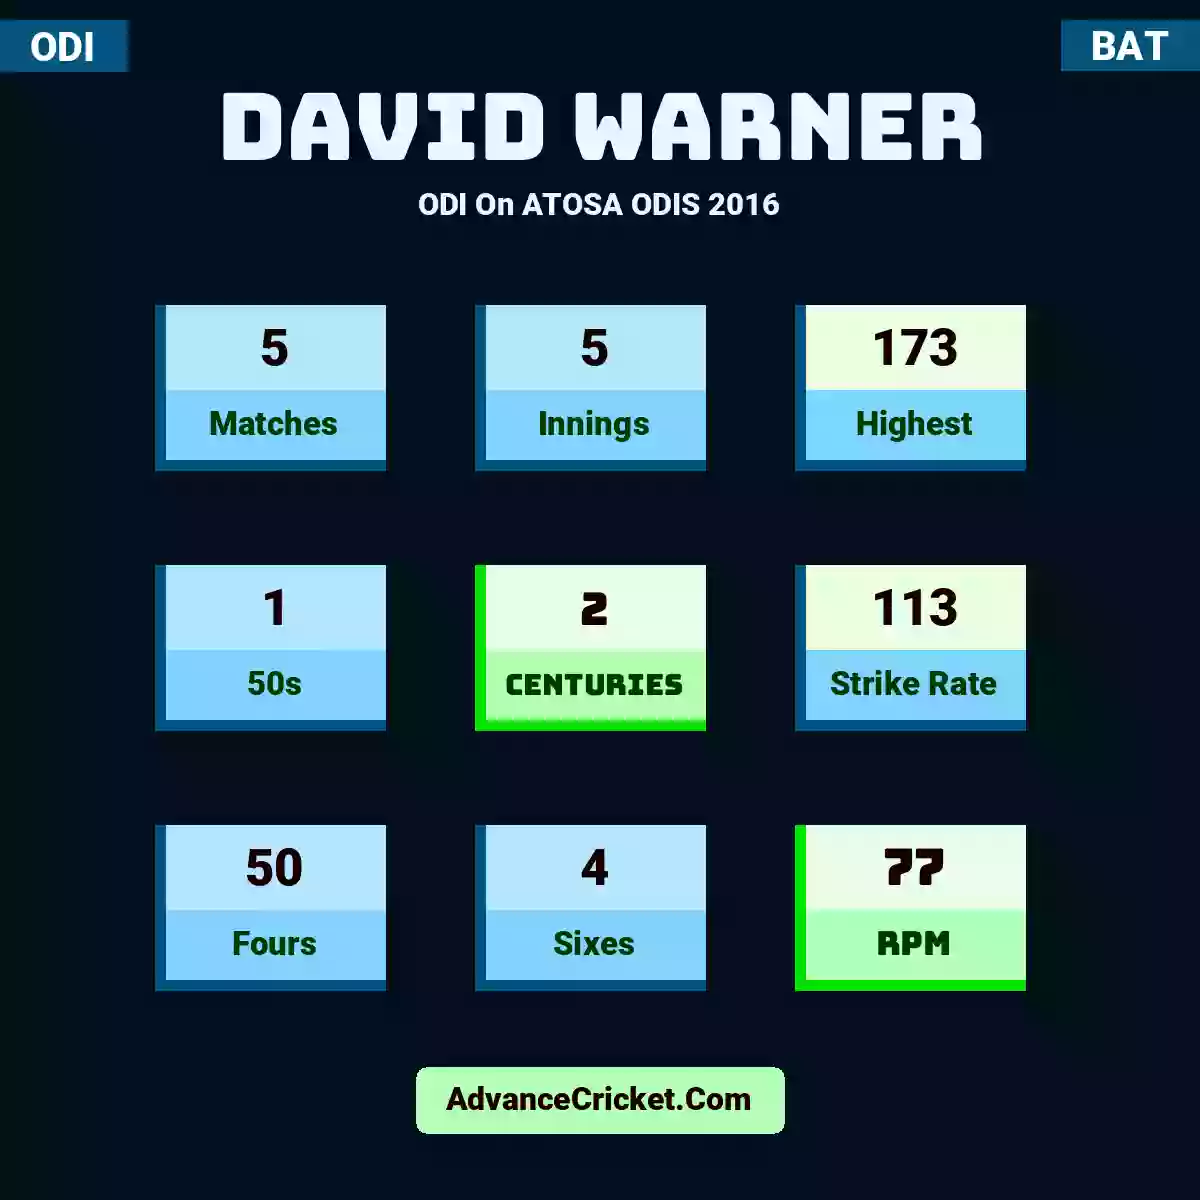 David Warner ODI  On ATOSA ODIS 2016, David Warner played 5 matches, scored 173 runs as highest, 1 half-centuries, and 2 centuries, with a strike rate of 113. D.Warner hit 50 fours and 4 sixes, with an RPM of 77.